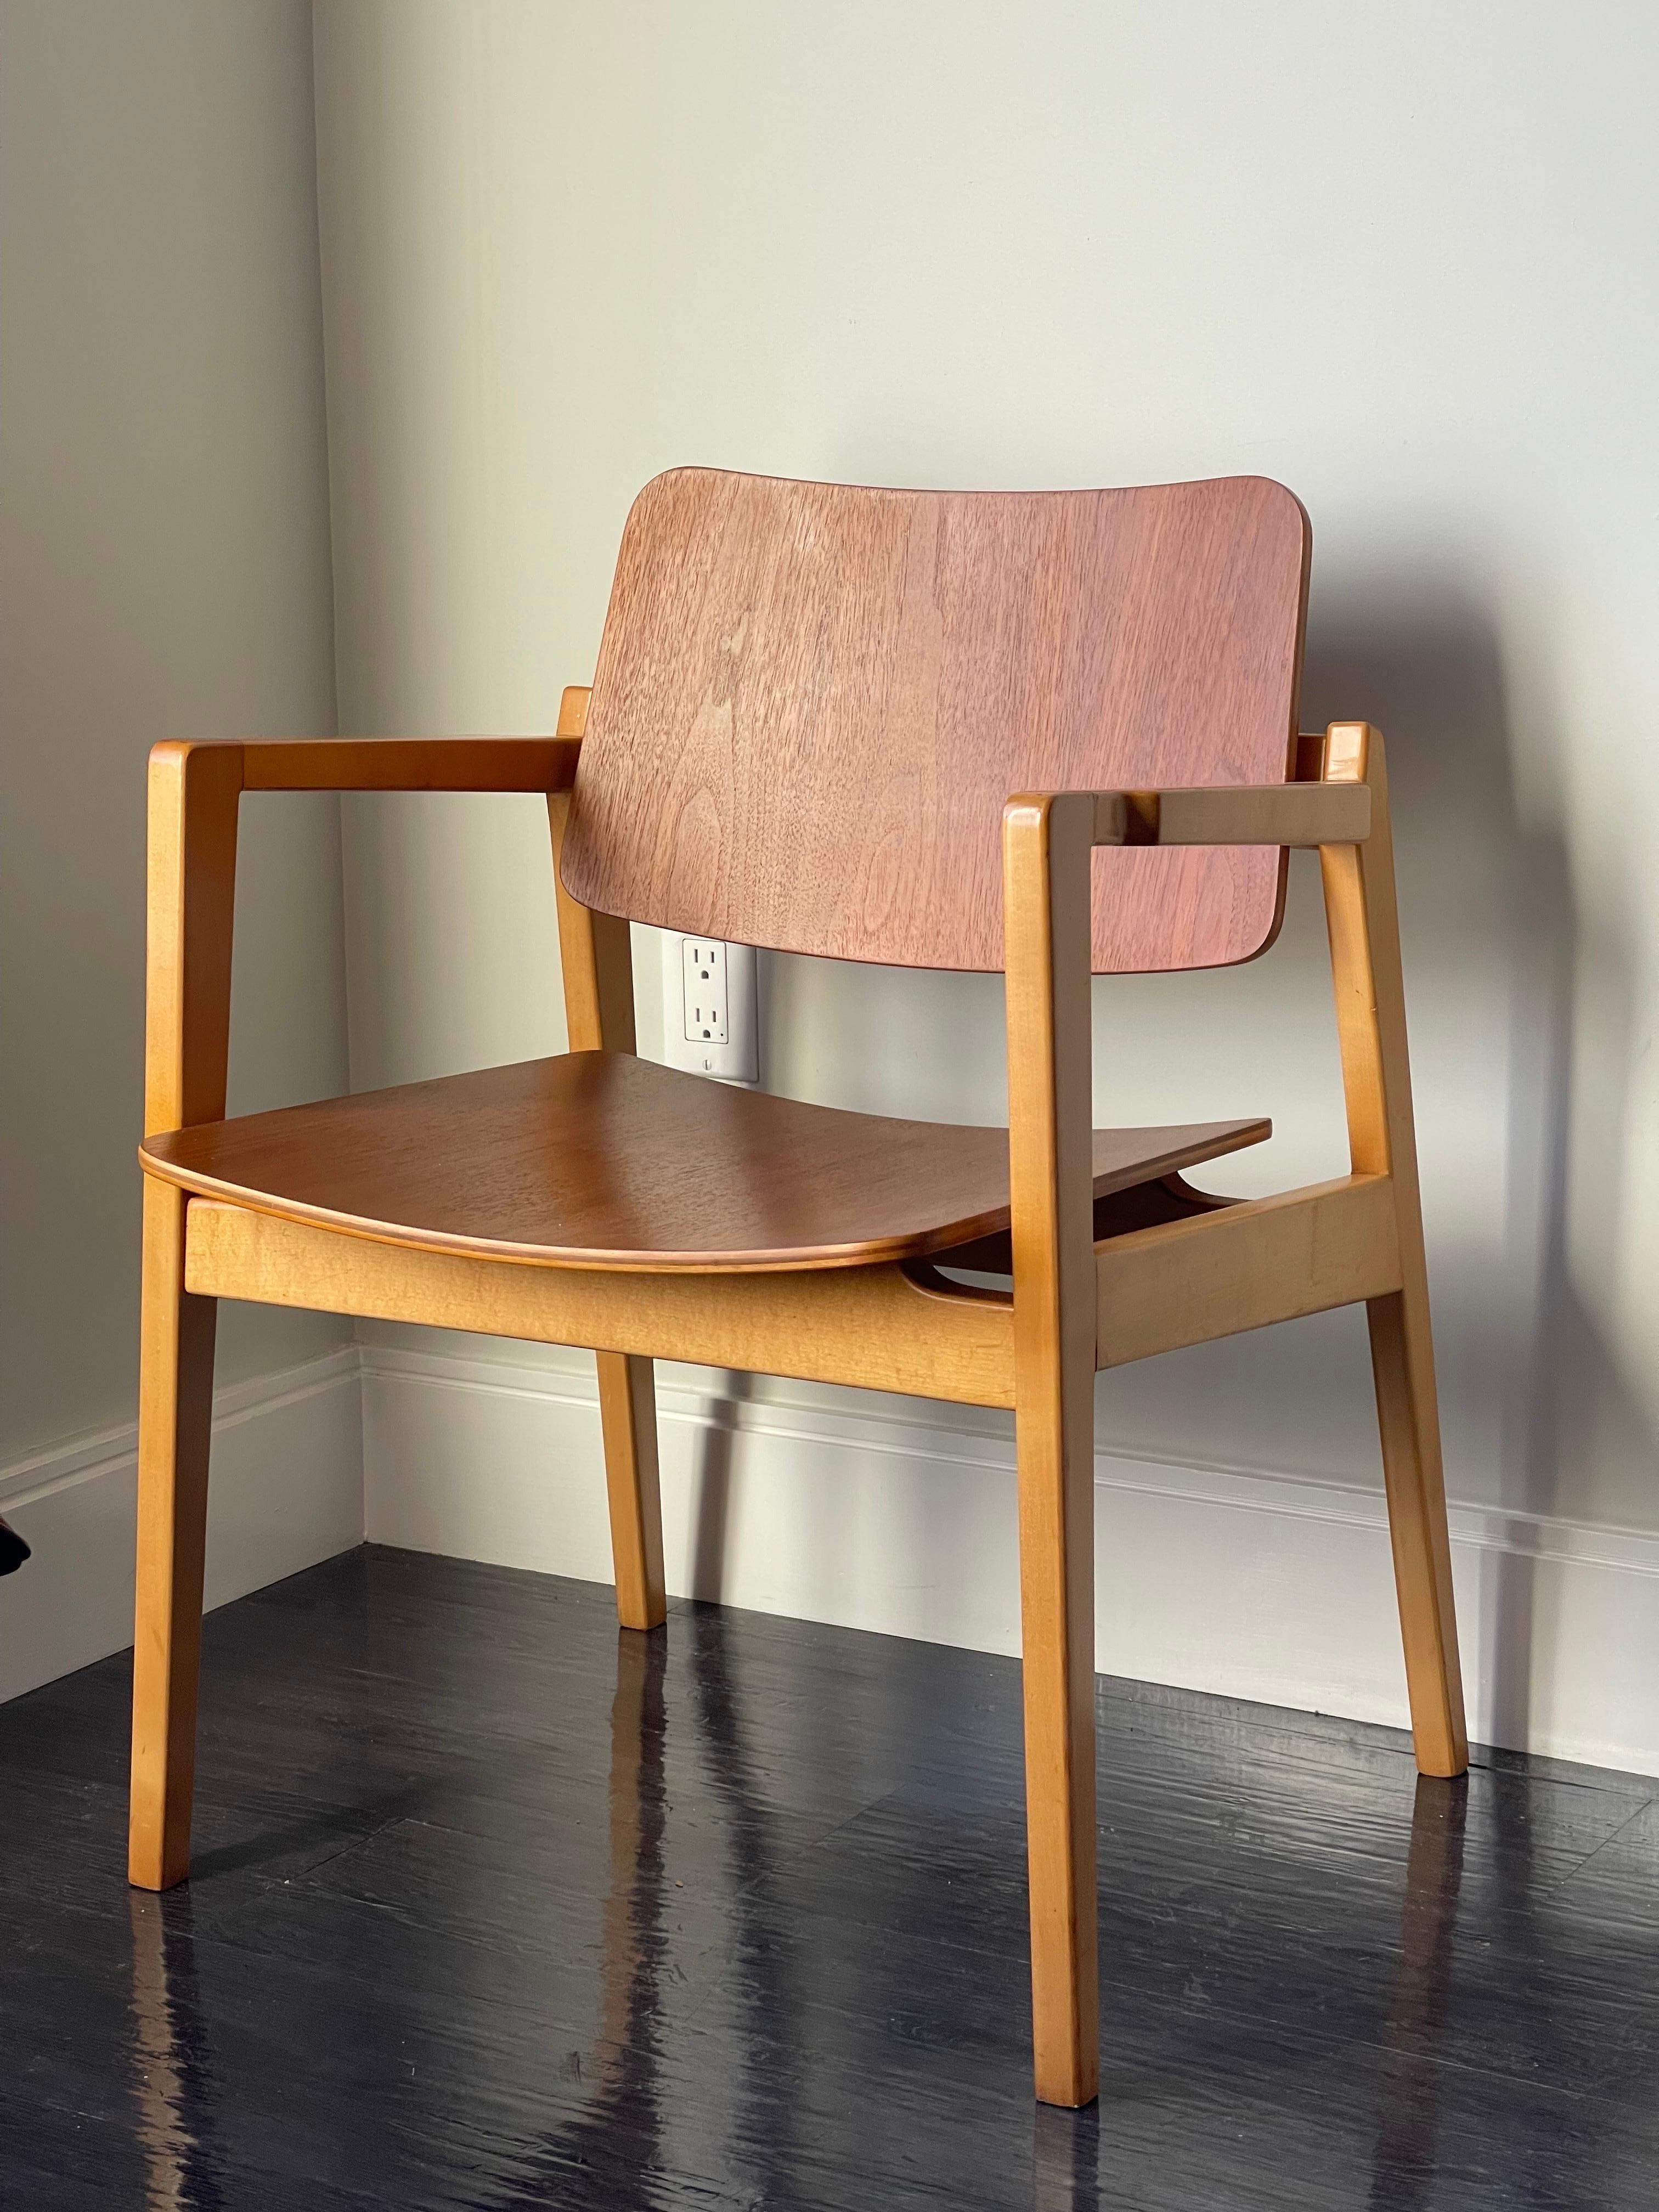 Mid-Century Modern Mid Century Chair in Beech and Bent Walnut Ply by Jens Risom 1952 For Sale